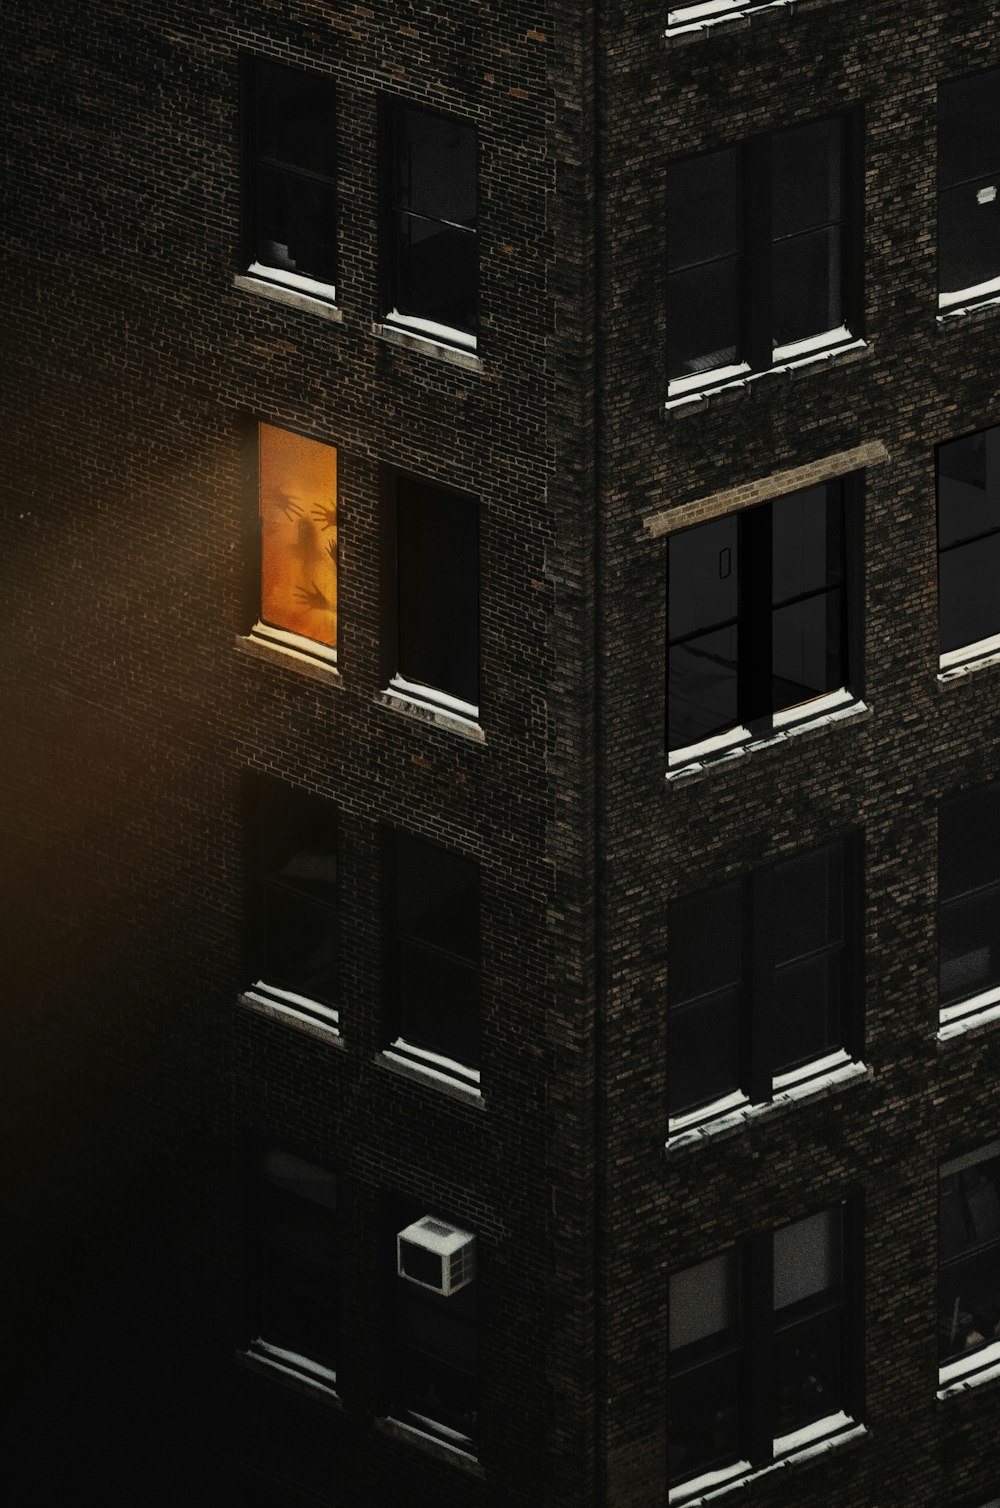 a tall building with windows and a street light